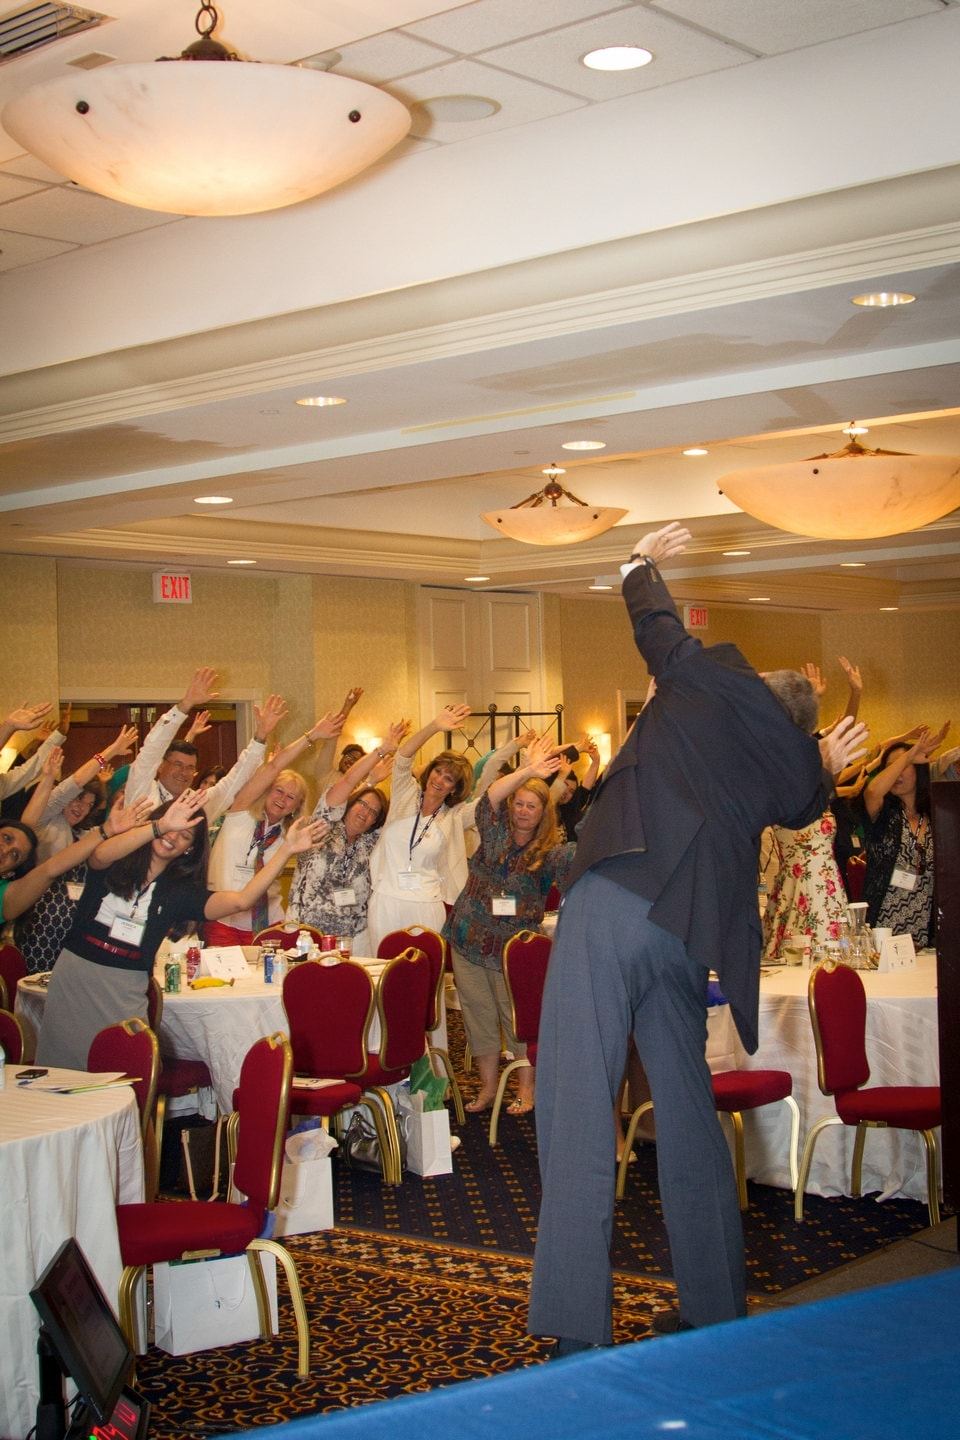 Continuing-education presenter and motivational speaker Dave Weber brought the crowd to their feet on more than one occasion with his energy.